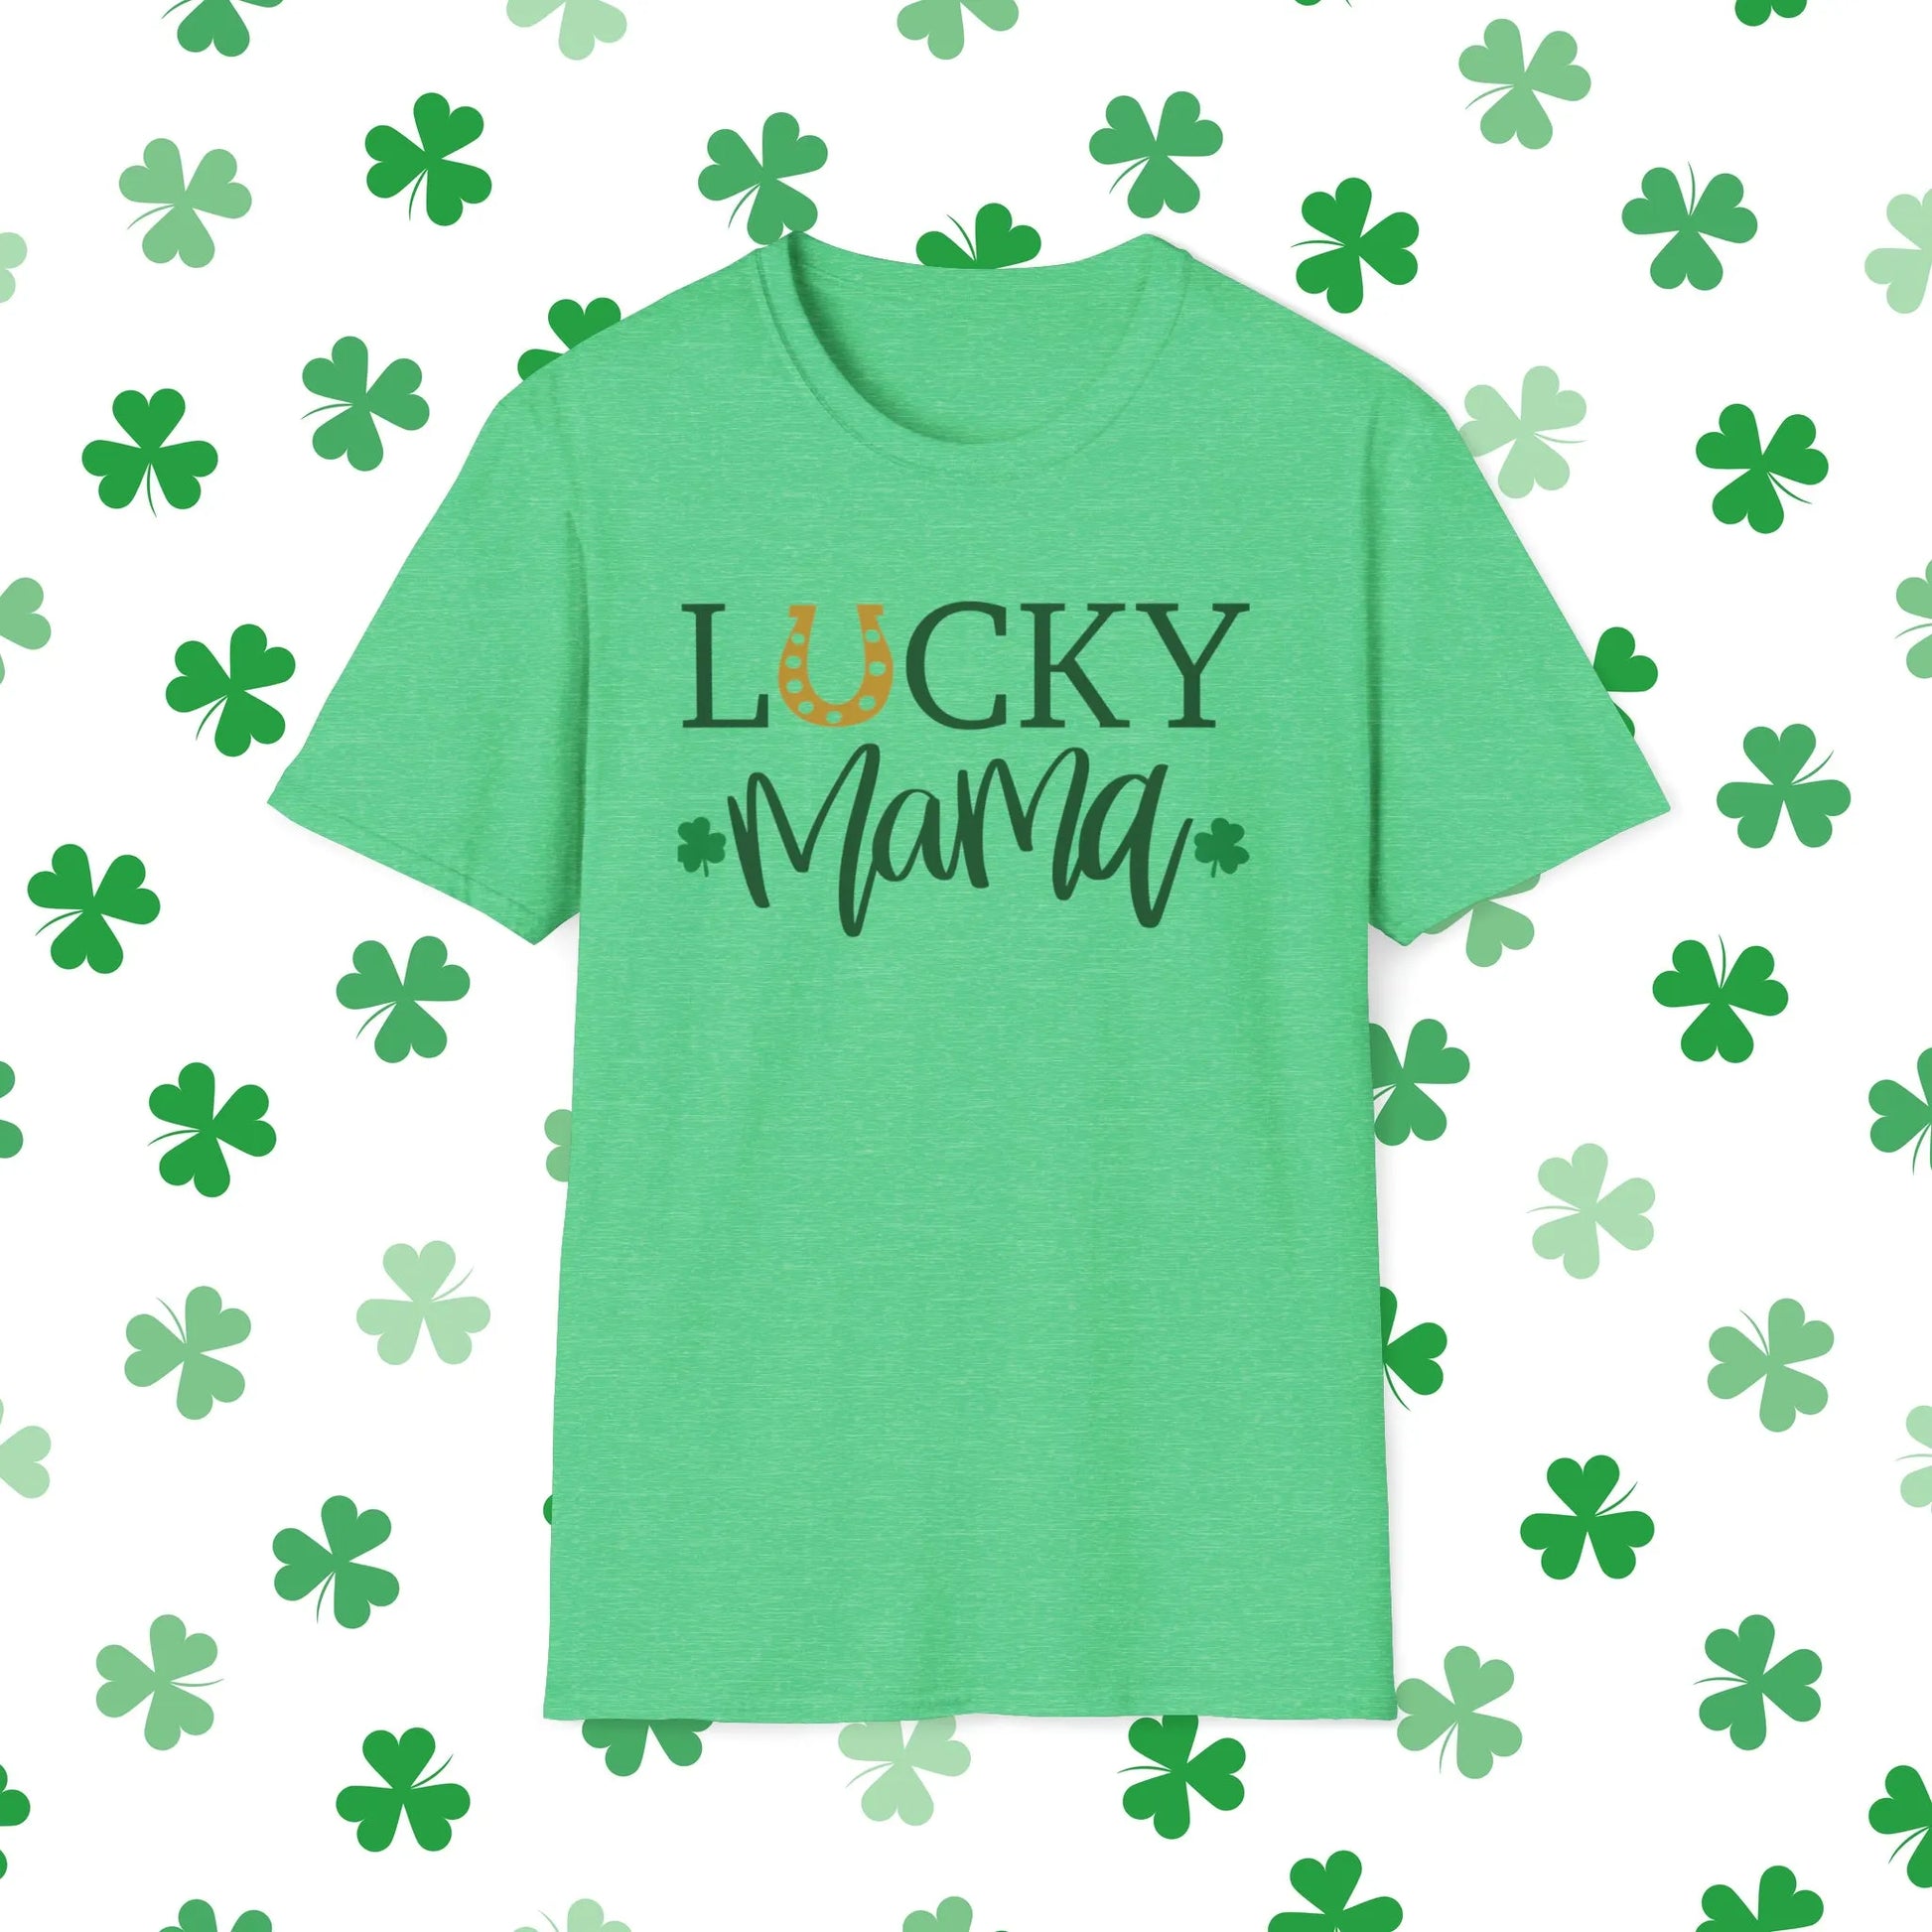 Lucky Mama St. Patrick's Day T-Shirt - Comfort & Charm - Lucky Mama Shirt Green Front